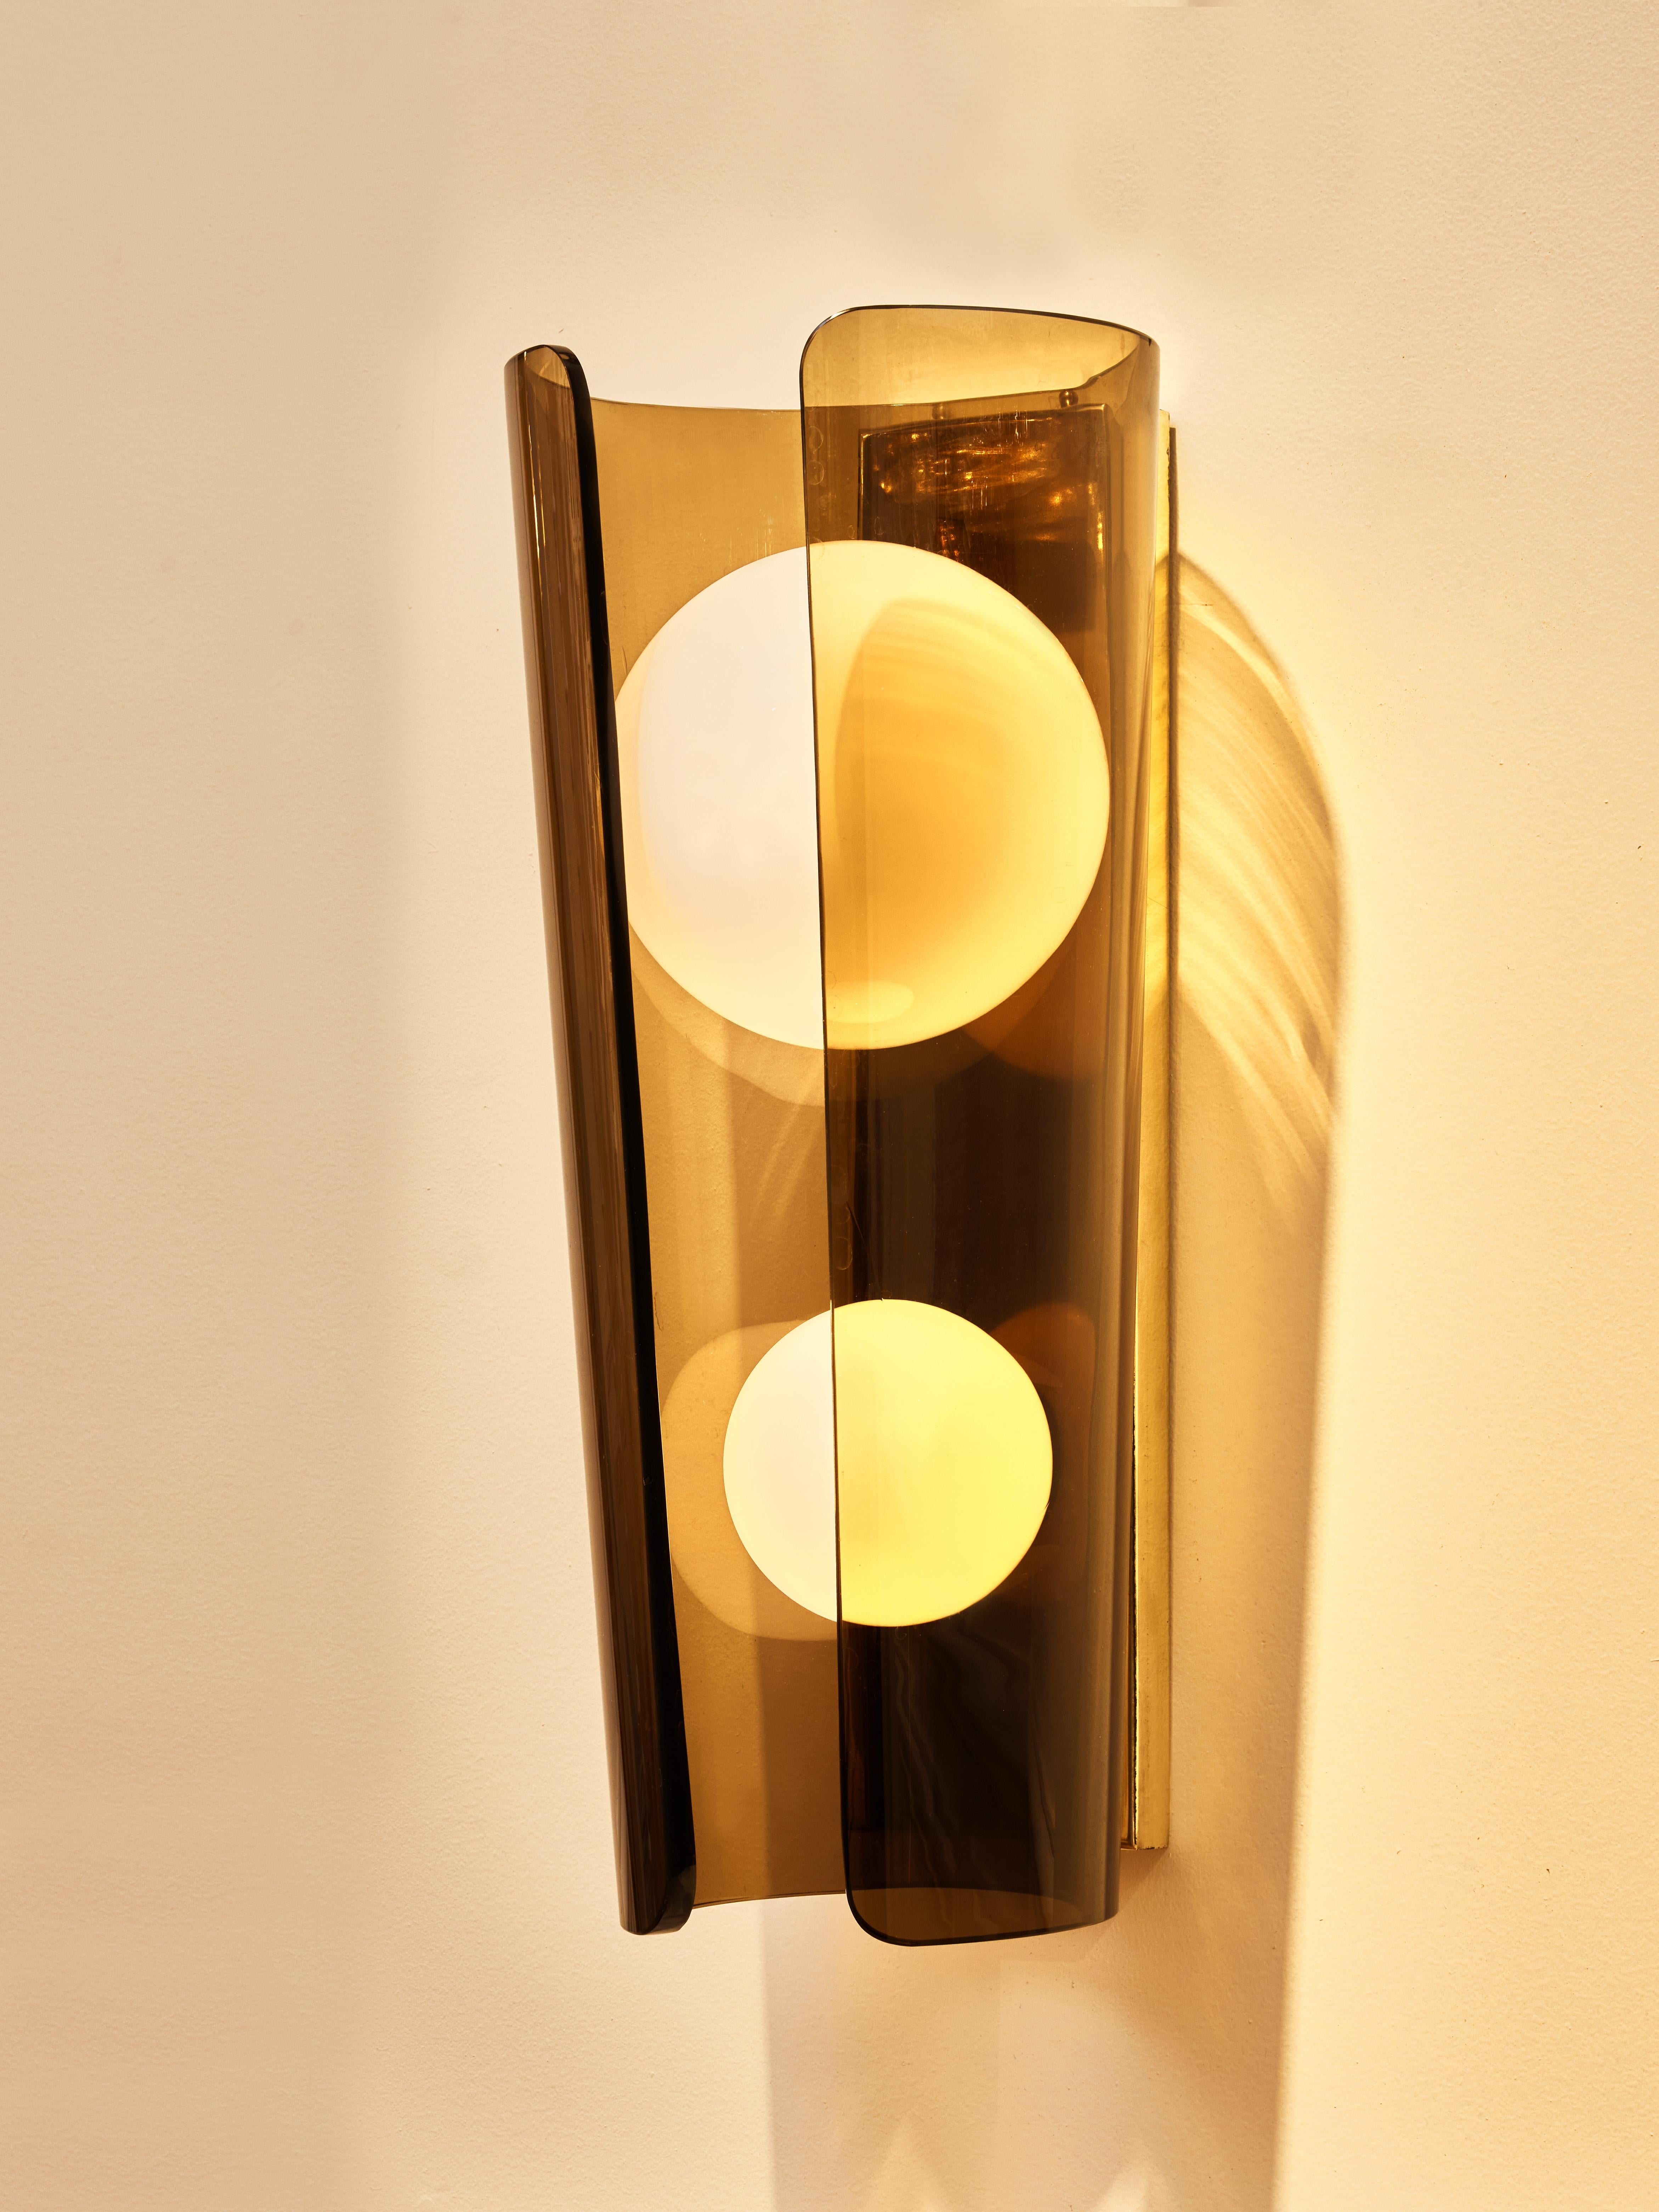 Superb pair of sconces in brass with smoked Murano glass and opaline glass globes.
Creation by Studio Glustin.
Italy, 2023